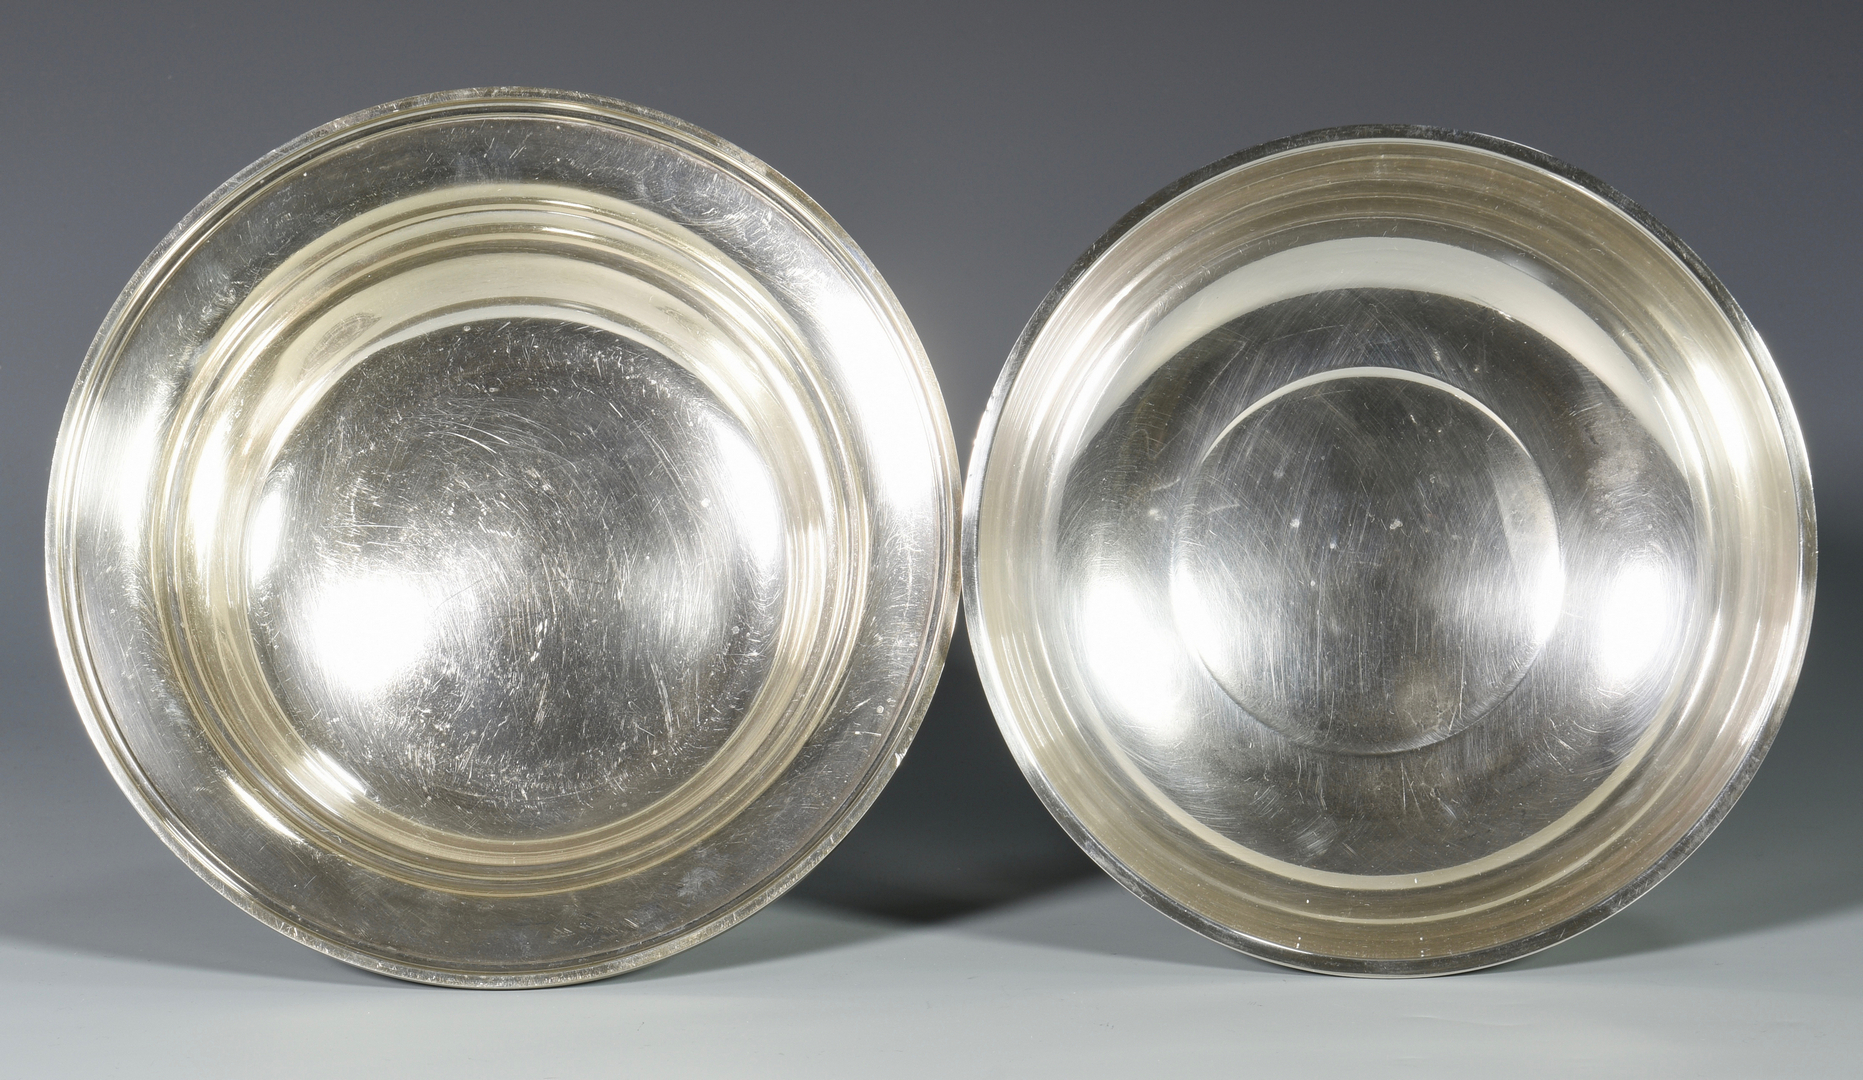 Lot 32: 2 Kirk & Son Sterling Silver Bowls